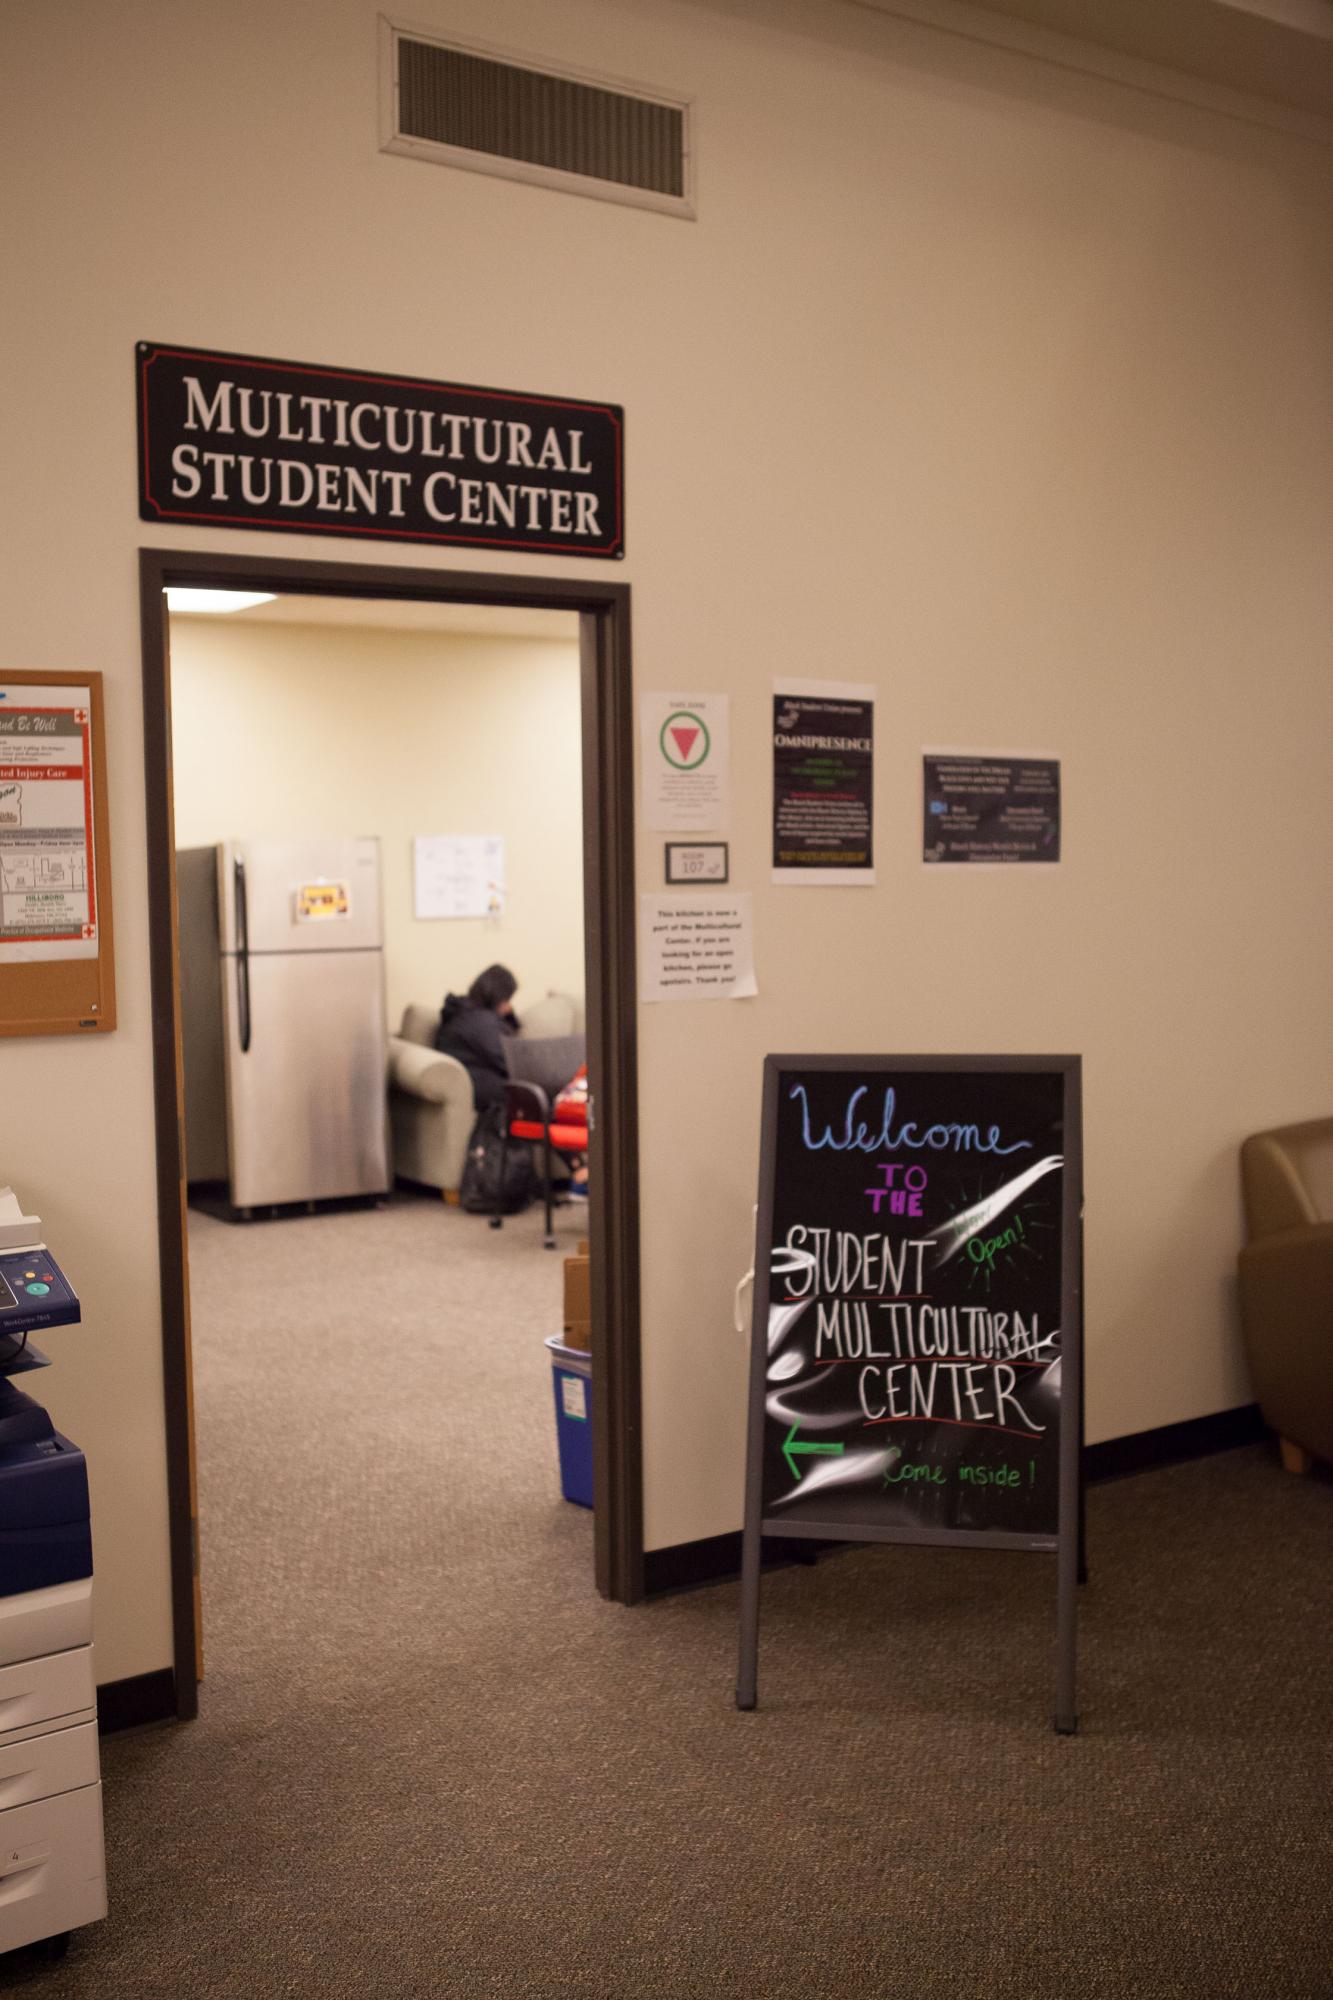 Student Multicultural Center